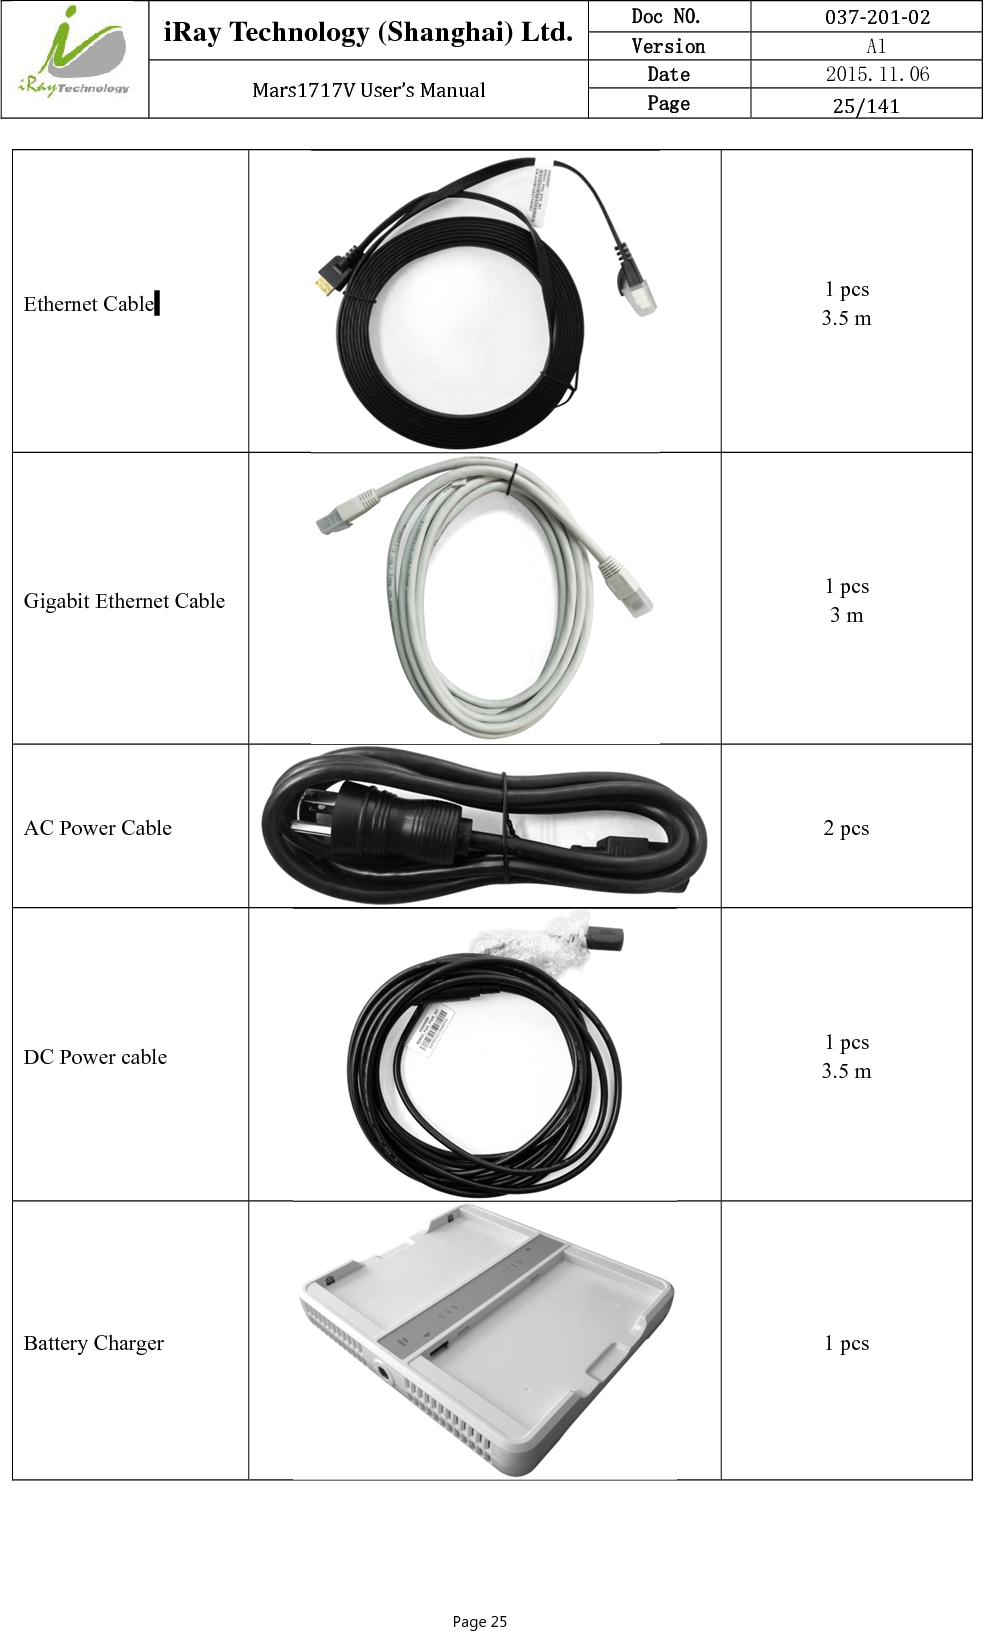  iRay Technology (Shanghai) Ltd. Doc N0.  037‐201‐02 Version    A1 Mars1717VUser’sManual Date  2015.11.06 Page  25/141Page 25 Ethernet Cable   1 pcs 3.5 m Gigabit Ethernet Cable  1 pcs 3 m AC Power Cable  2 pcs DC Power cable  1 pcs 3.5 m Battery Charger  1 pcs 